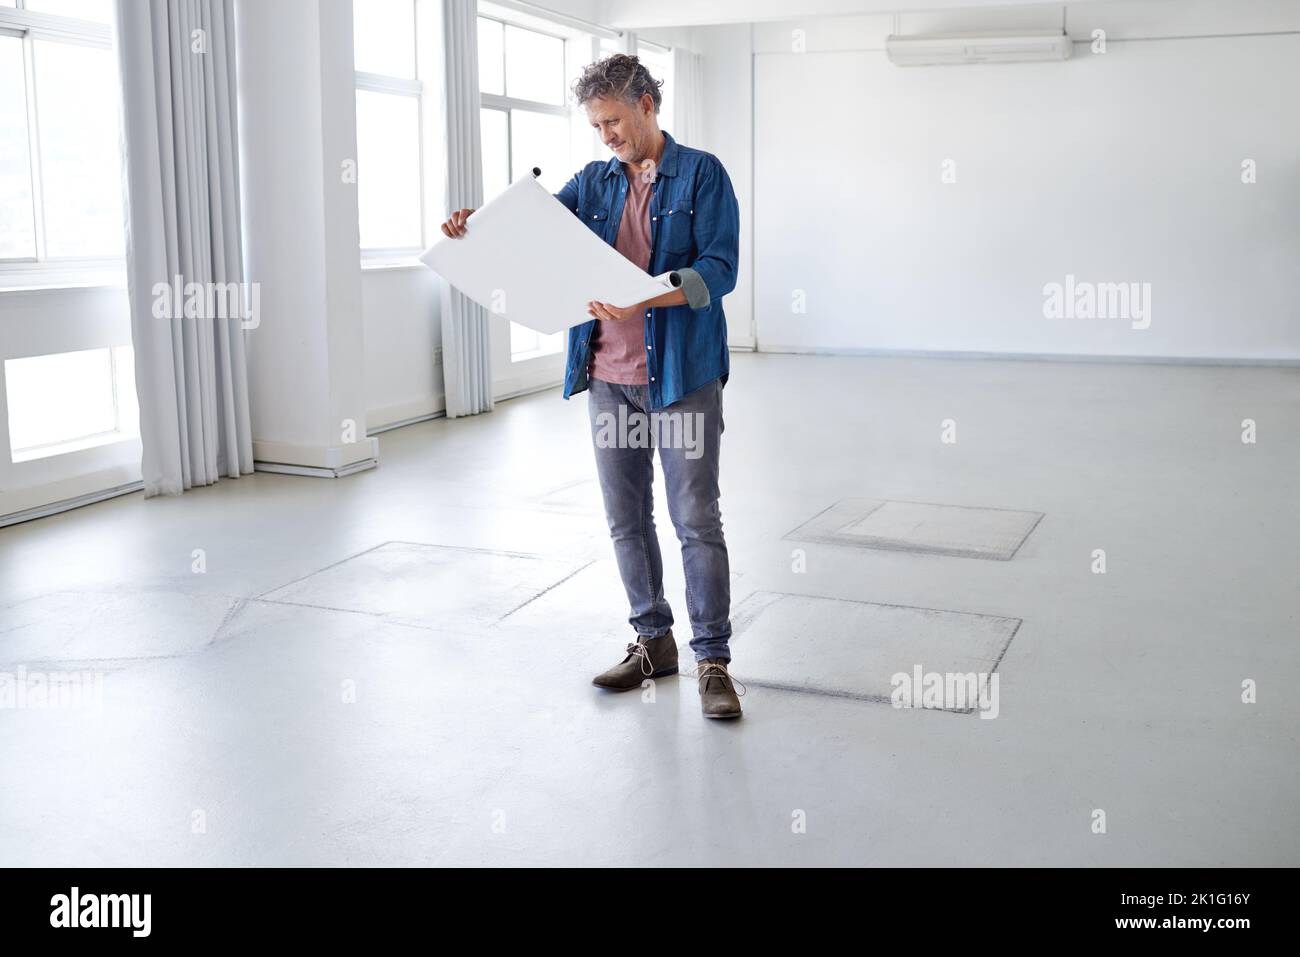 This rooms going to look great. A mature man looking at building plans while standing in an empty room. Stock Photo